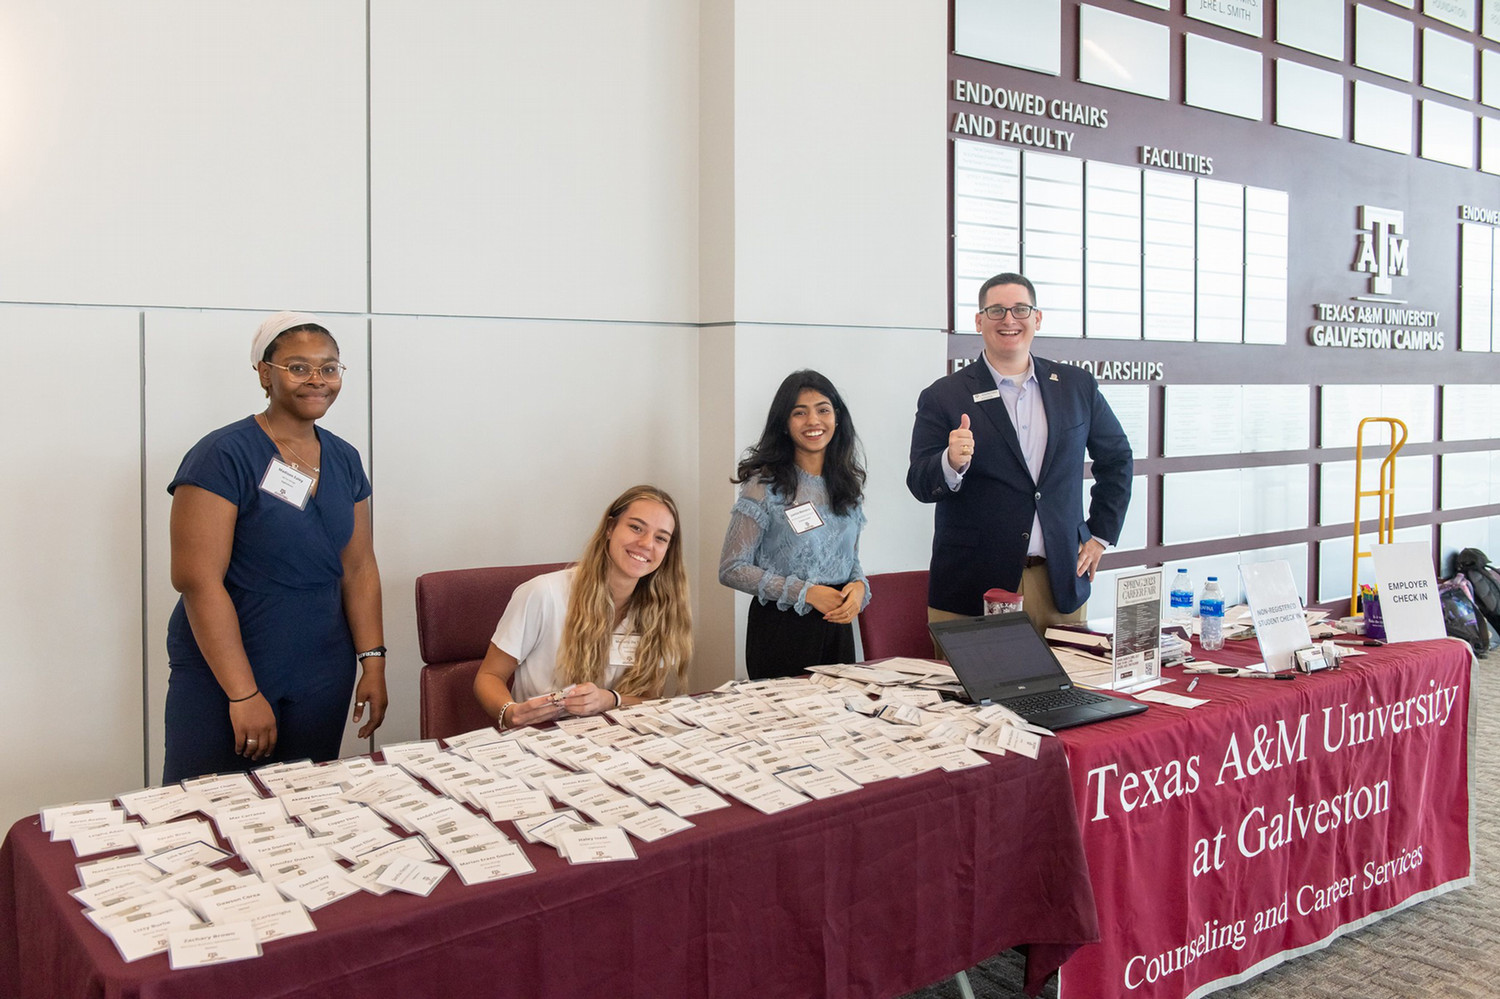 Texas A&M University at Galveston students volunteering at the check in table. 